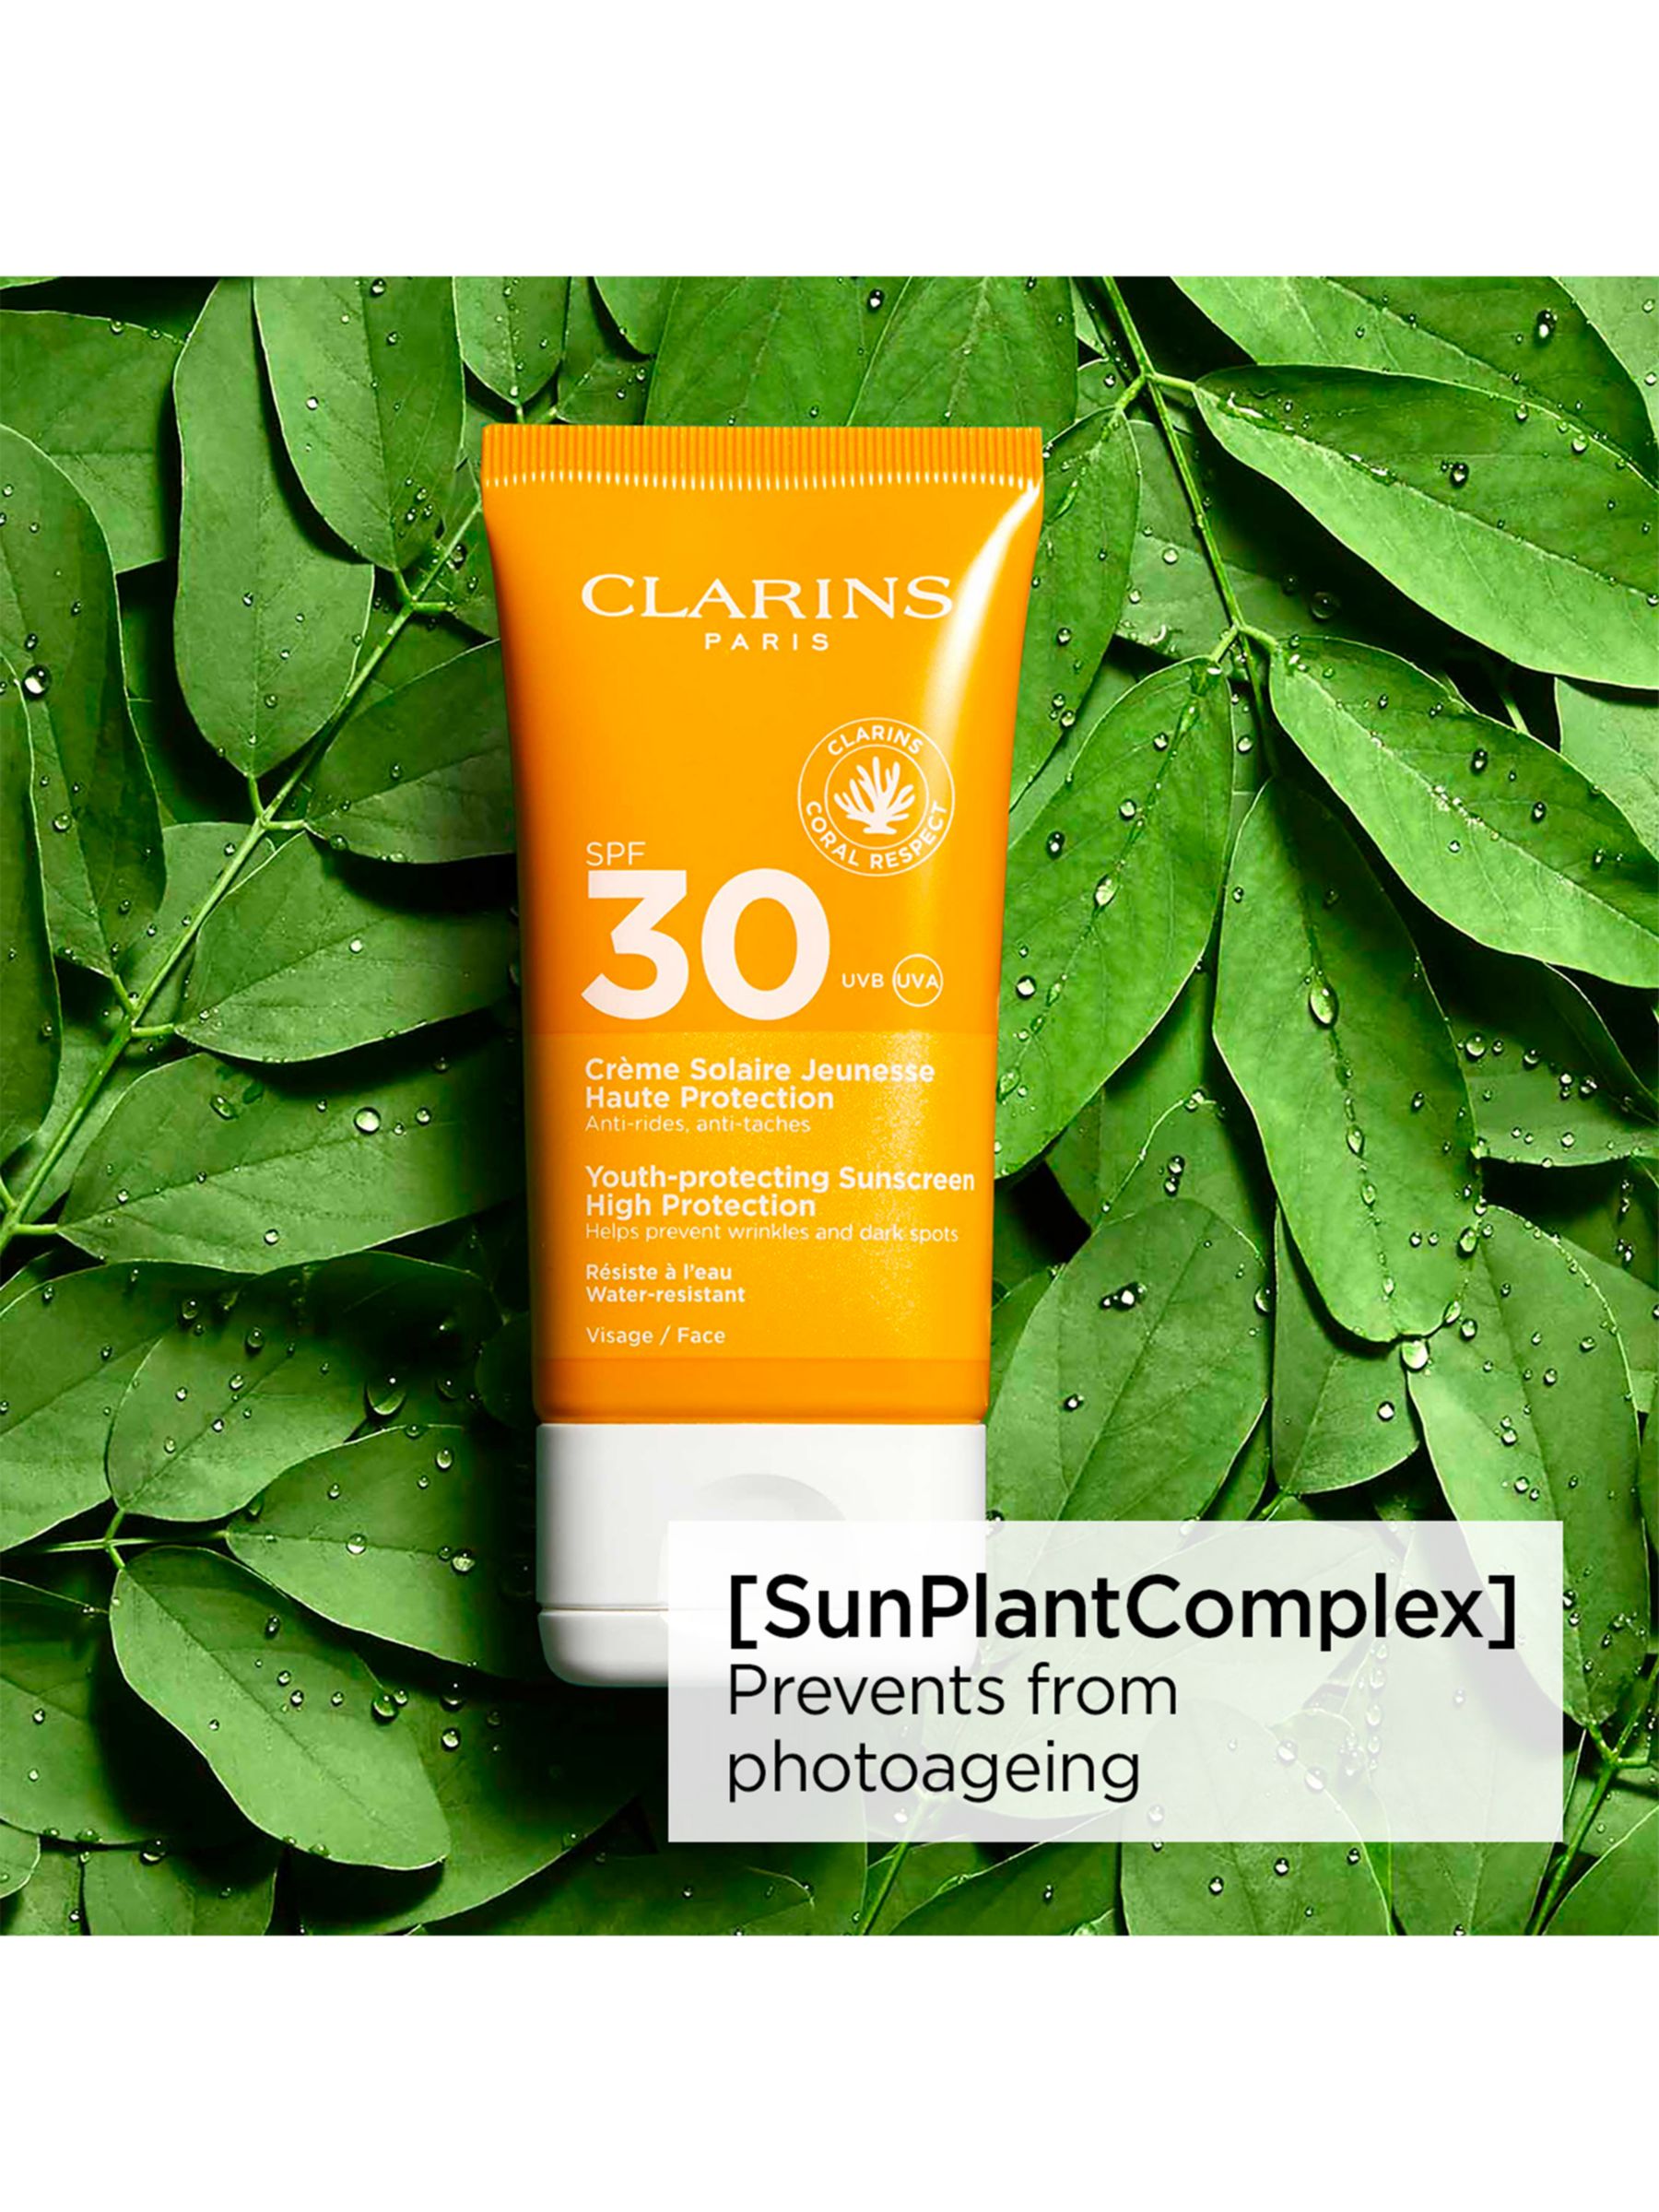 Clarins Youth-Protecting Sunscreen High Protection SPF 30, 50ml